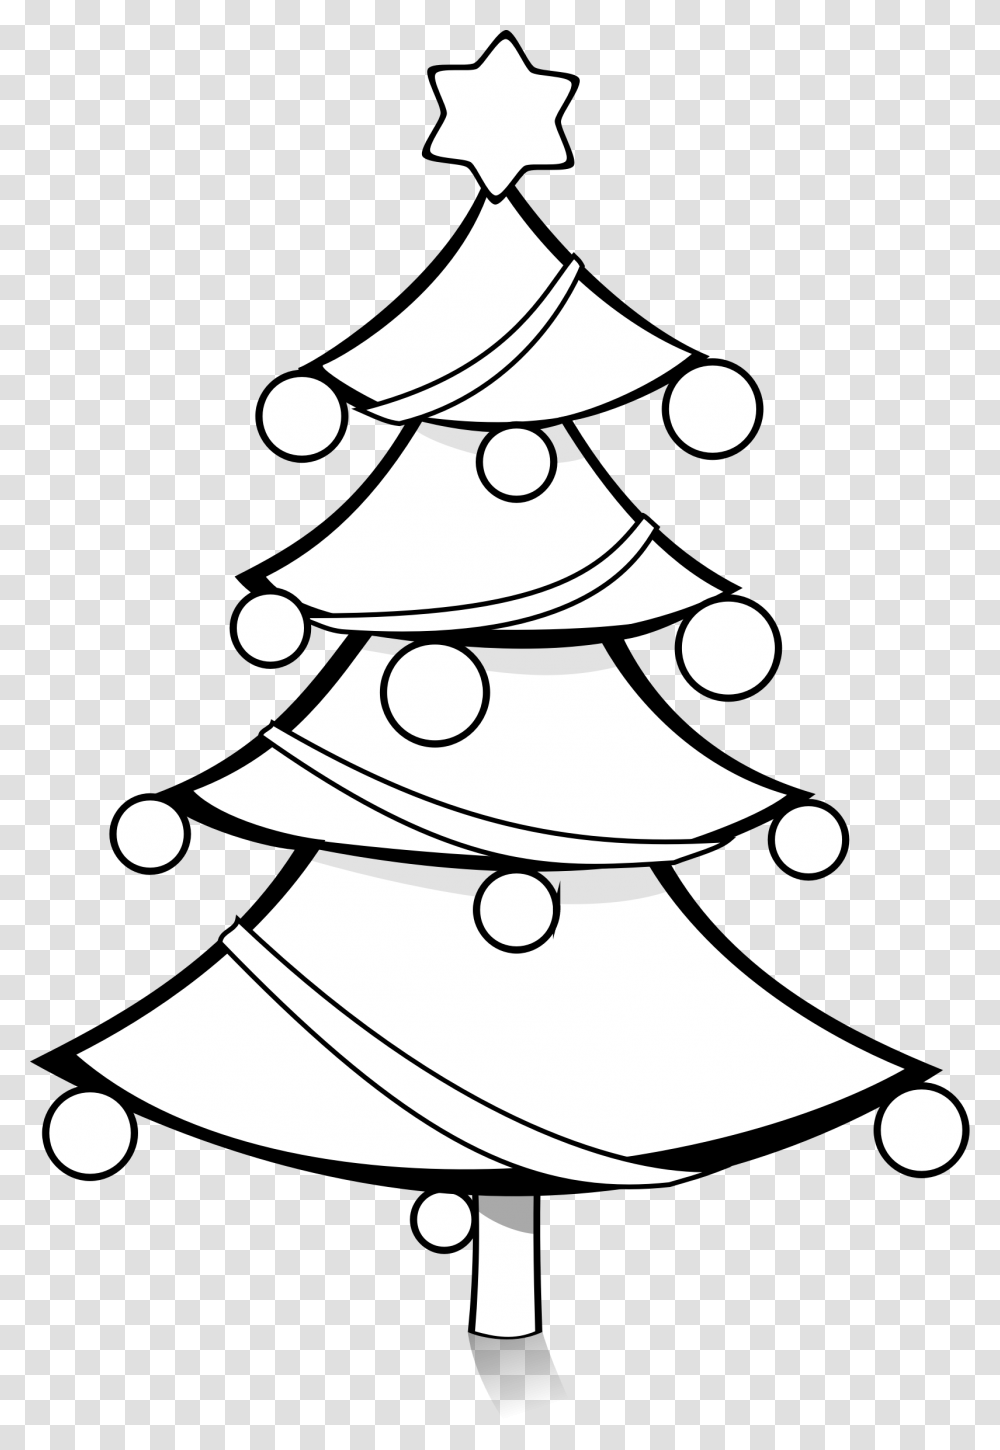 Christmas Tree With Balls Vector Illustration Christmas Tree Clipart Black And White, Plant, Ornament, Star Symbol, Lamp Transparent Png